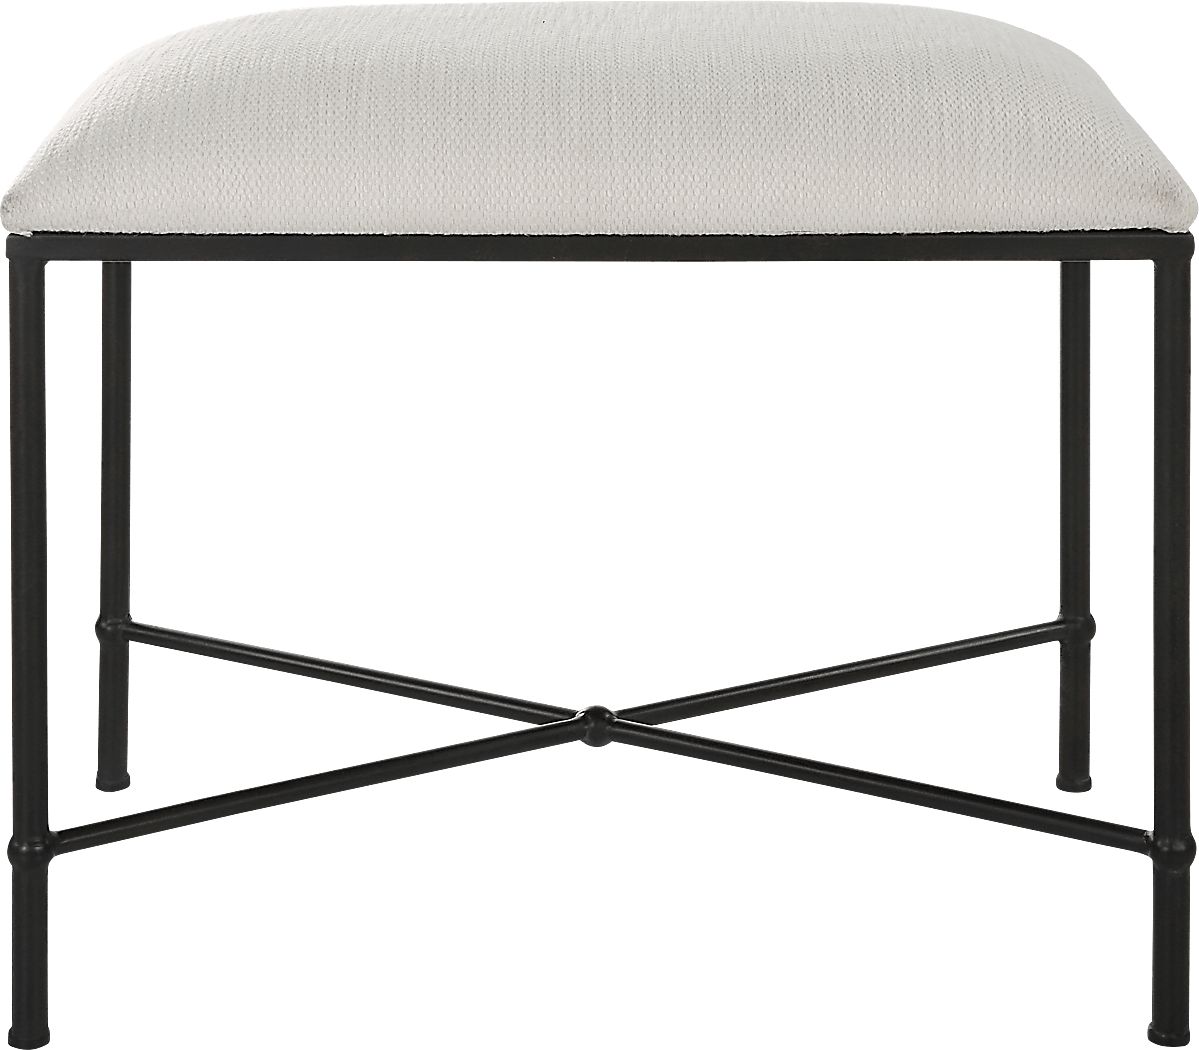 Rooms To Go Cenera White Accent Bench